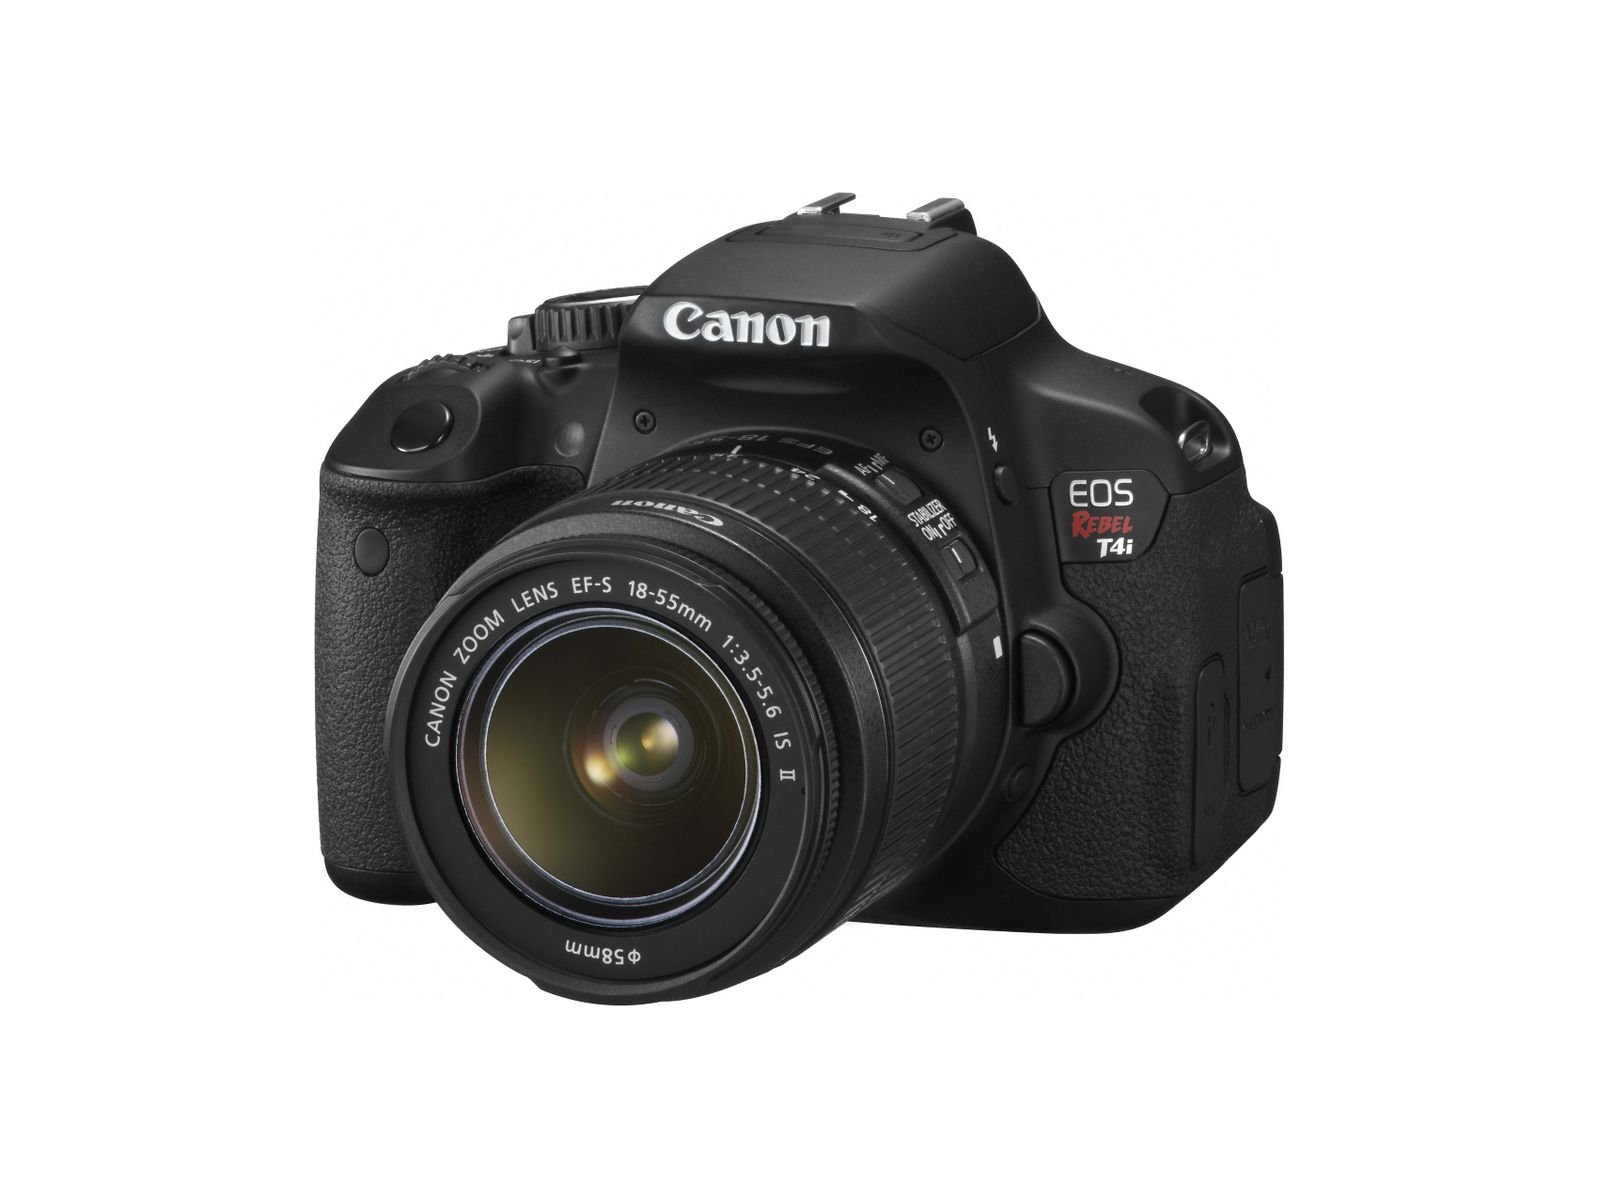 Canon 6558B003 EOS Rebel T4i 18-135mm is TM Lens Kit 18MP SLR Camera with 3-Inch LCD Body (Black)